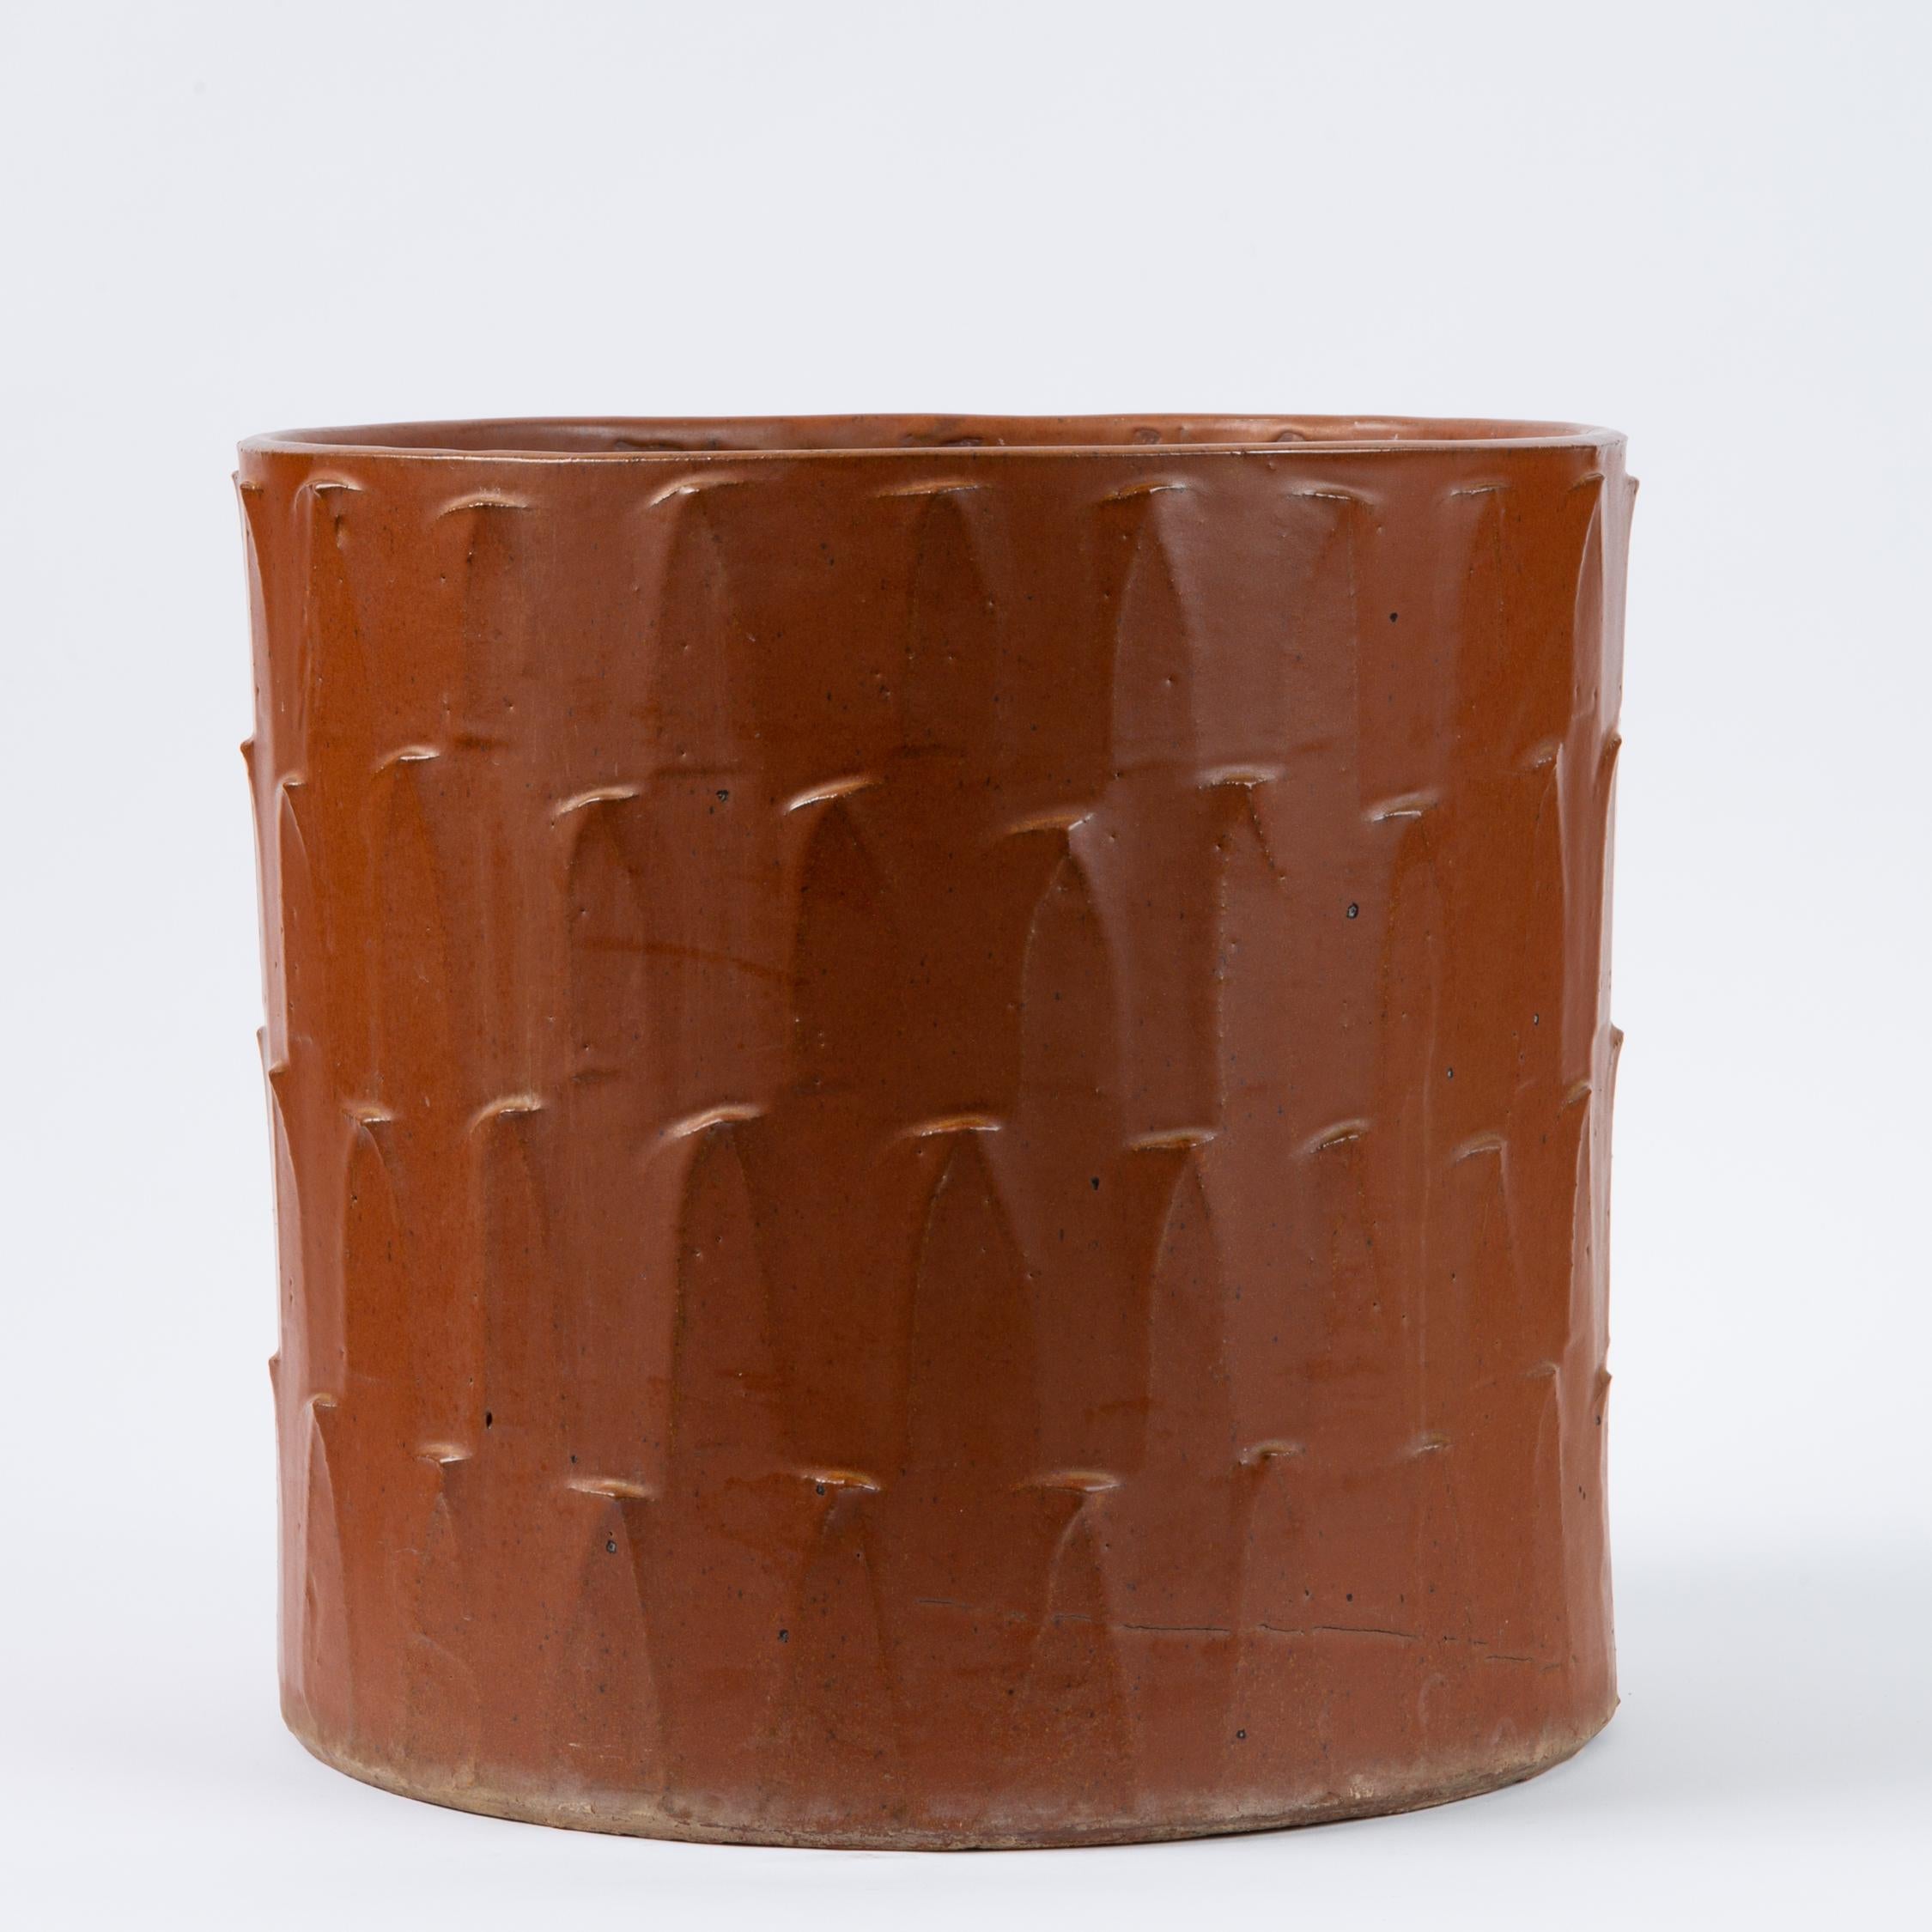 Model no. 4043 planter by David Cressey for Architectural Pottery’s Pro/Artisan stoneware line. The straight-sided cylindrical vessel is slip cast and then textured with the line’s “Leaf” option, a series of petal-shaped strokes moving up the sides